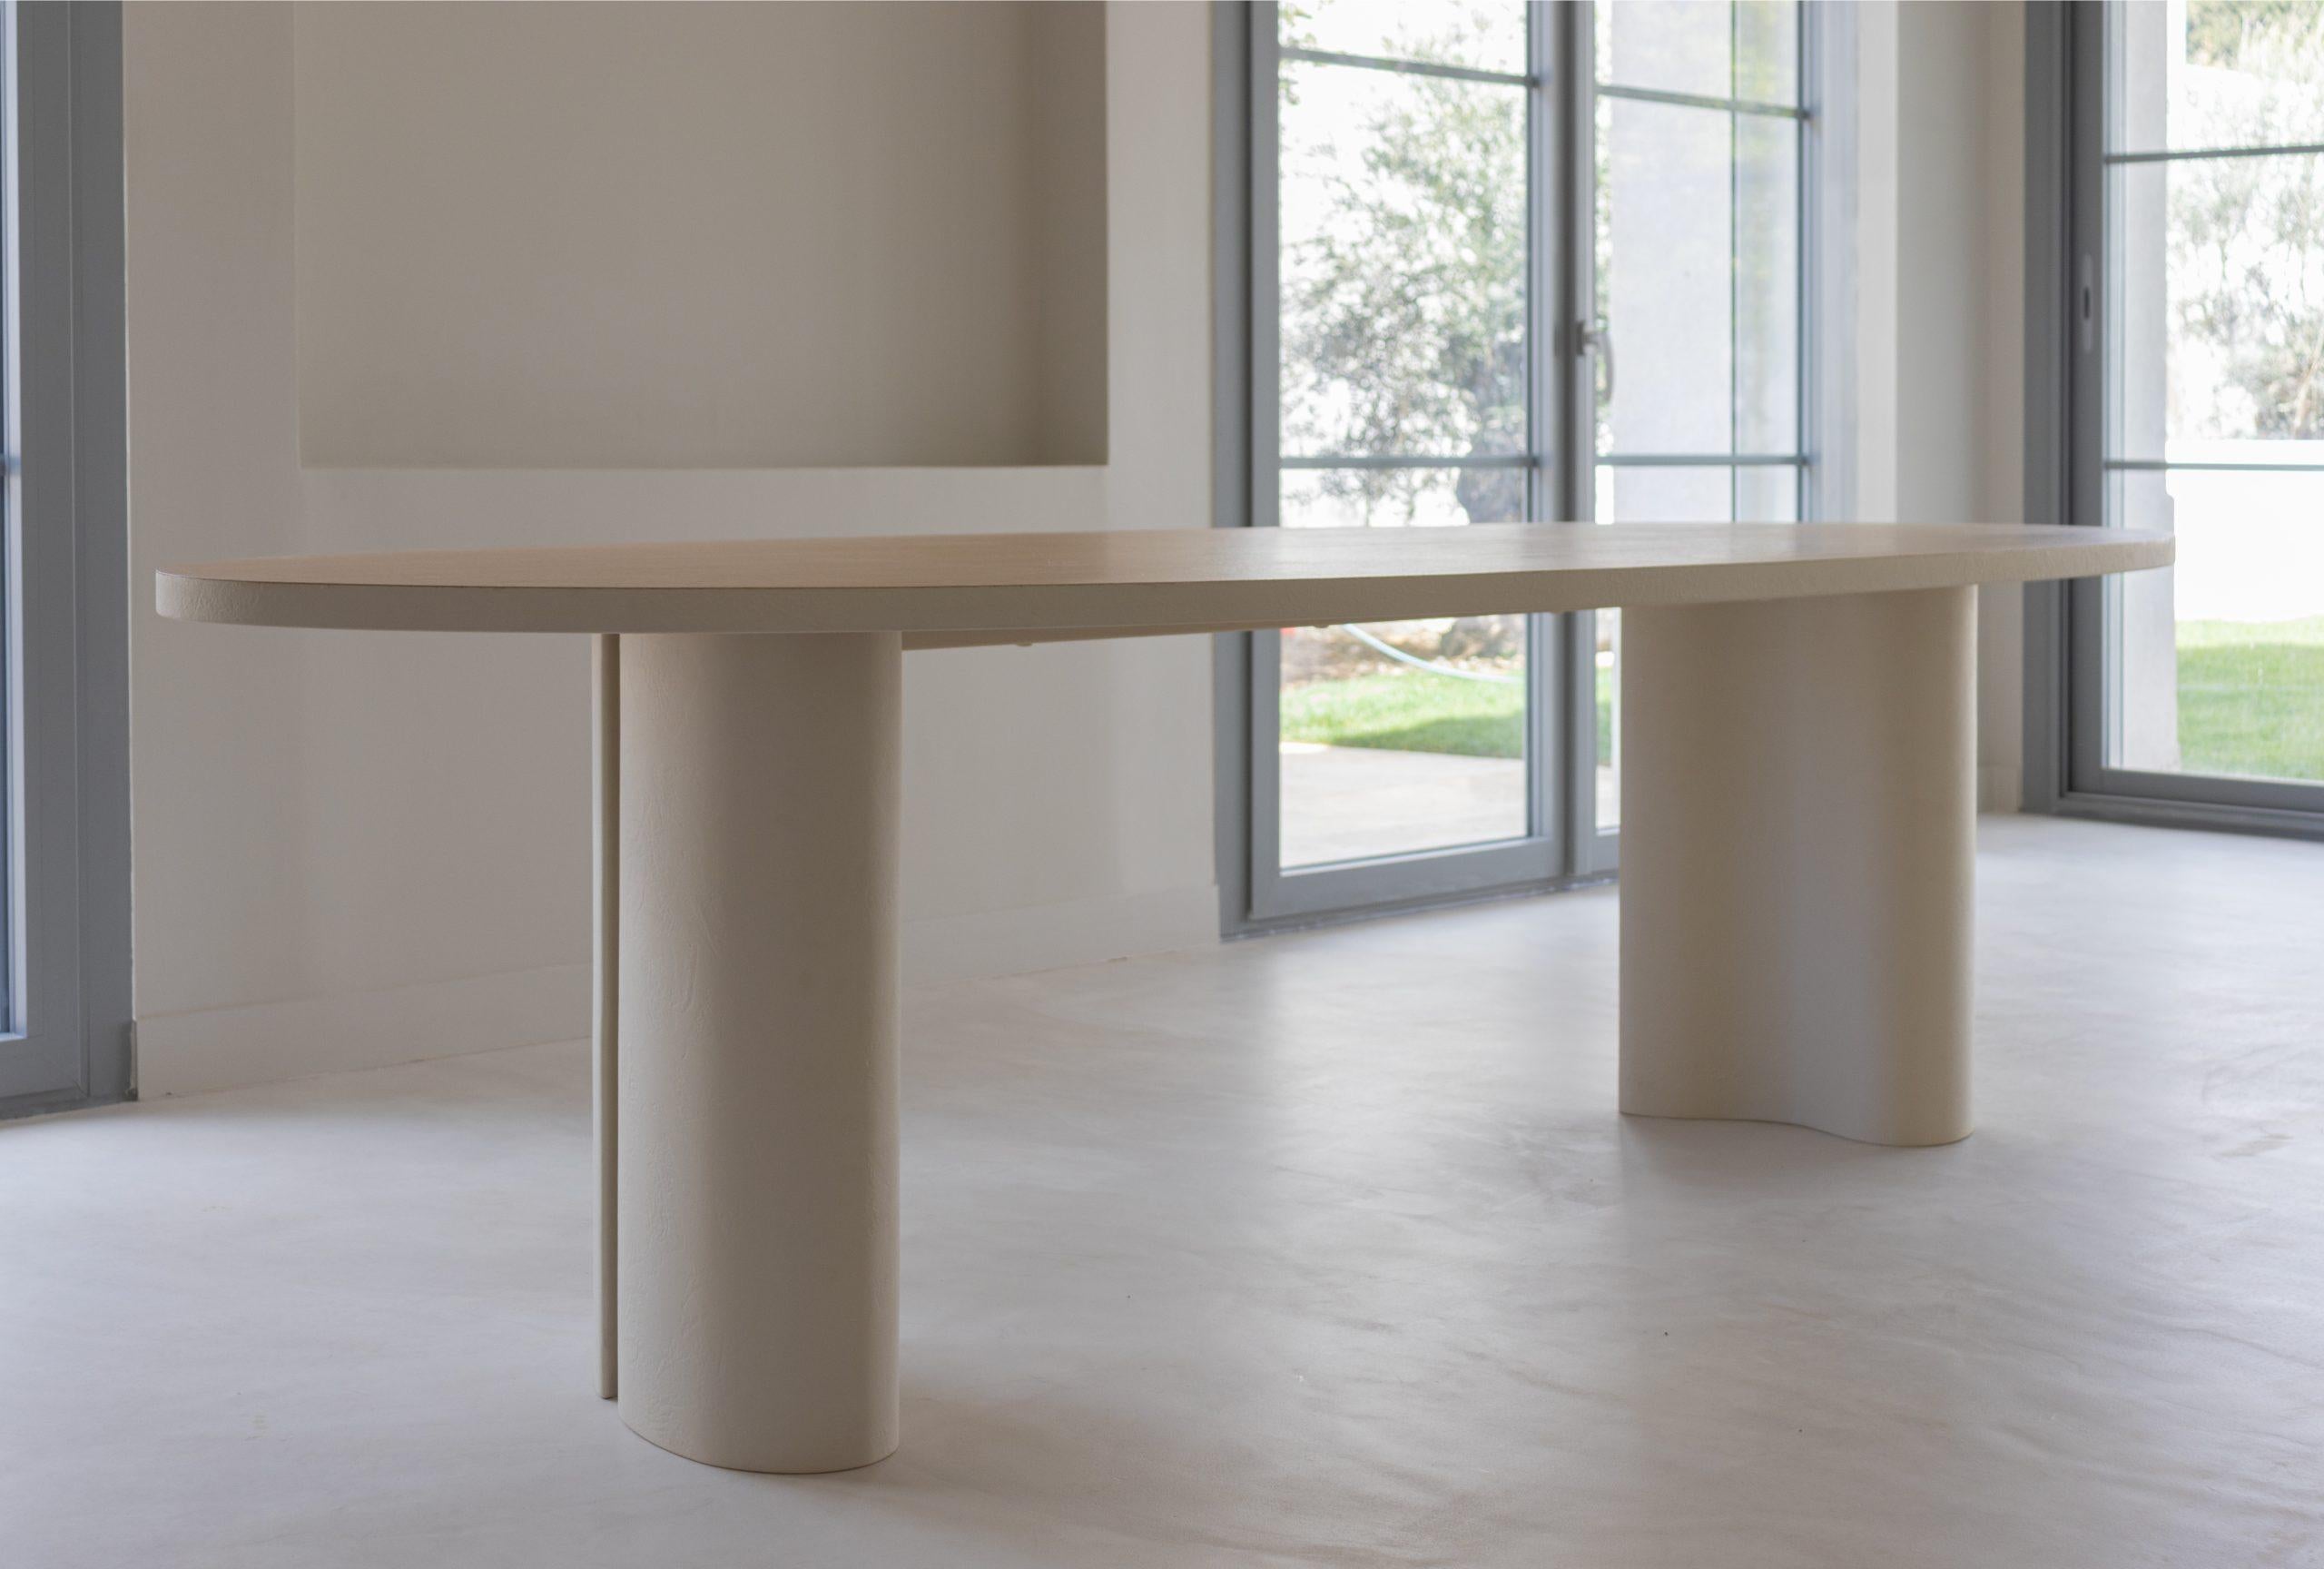 Unique Louka Dining Table Signed by Gigi Design
Dimensions: D280 x W90 x H74 cm
Materials: Natural oak veneer
 
Inspired by Greece, the table Louka is generous and pure.
Its large asymmetrical top of is veneered in natural oak.
We realized a lacquer